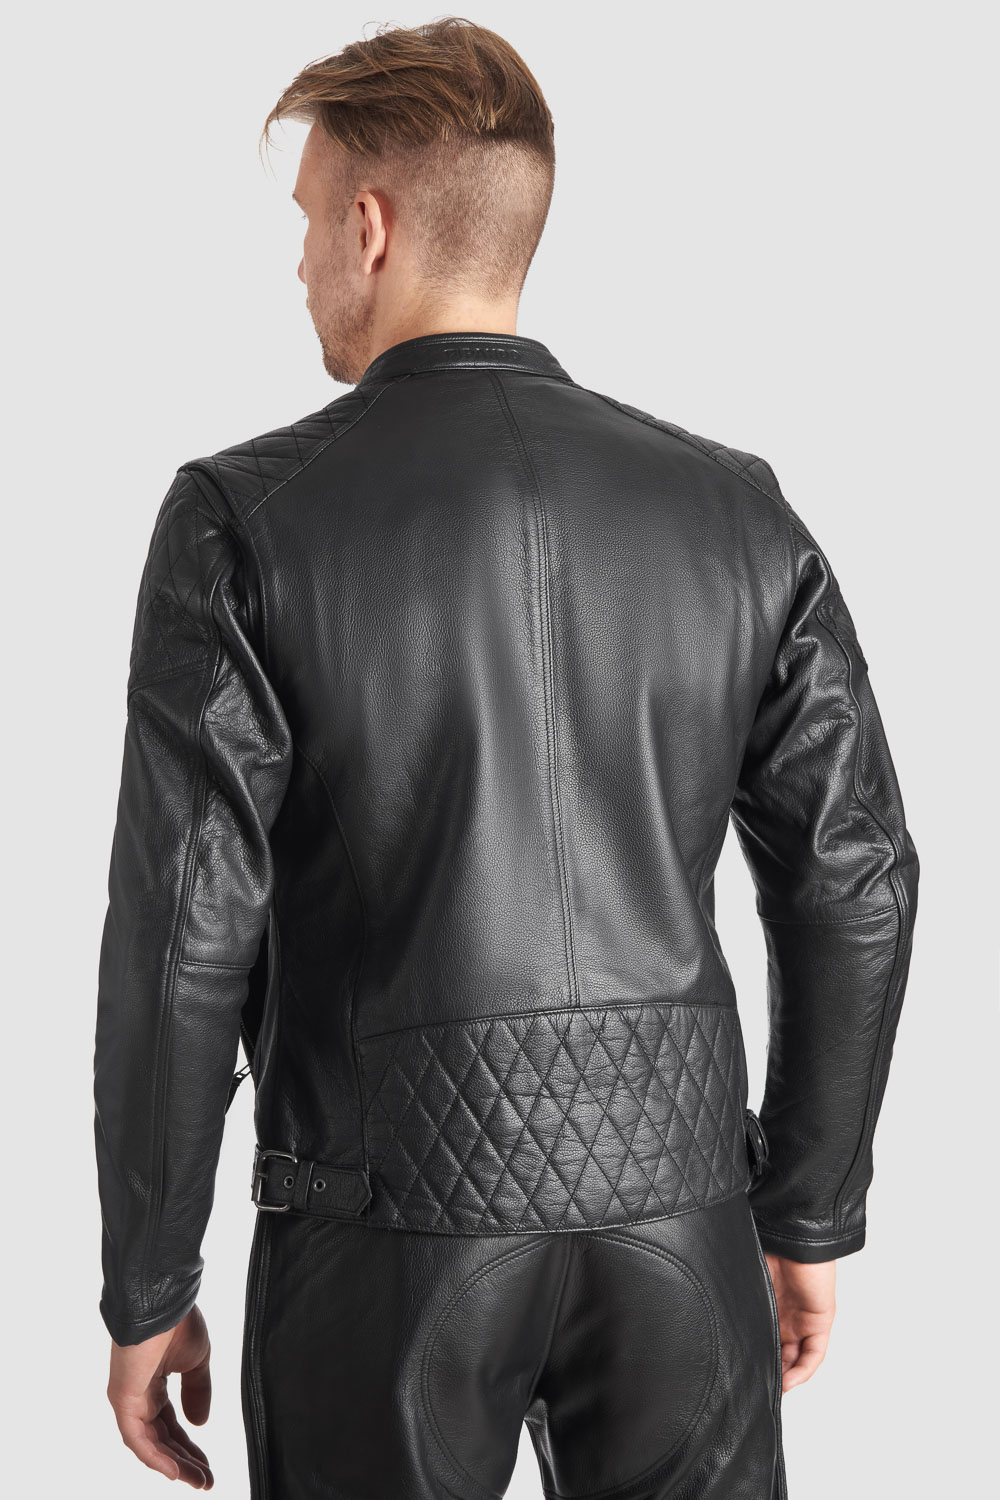 Motorcycle Riding Gear Created For Men